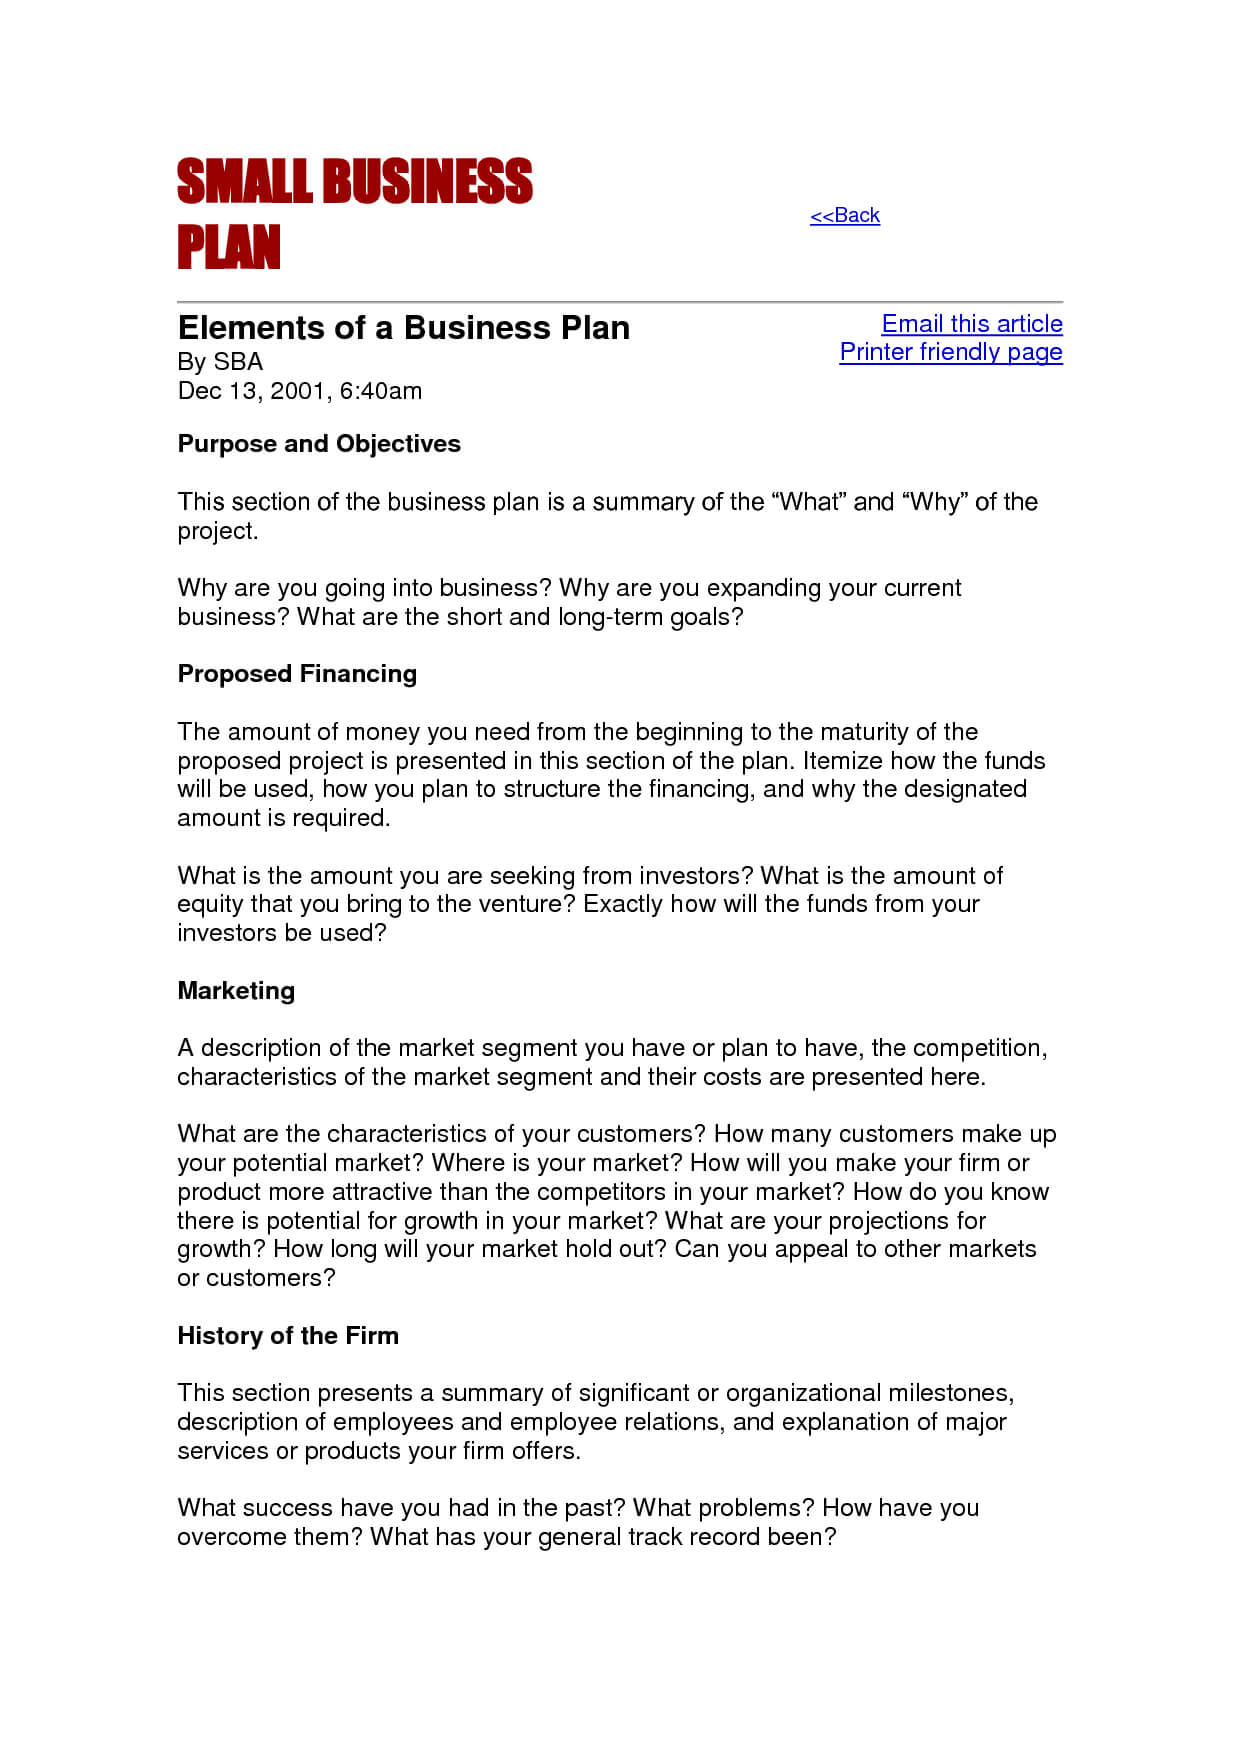 Small Iness Proposal Template Building Stronger Plans Plan Inside Business Proposal Template For Bank Loan